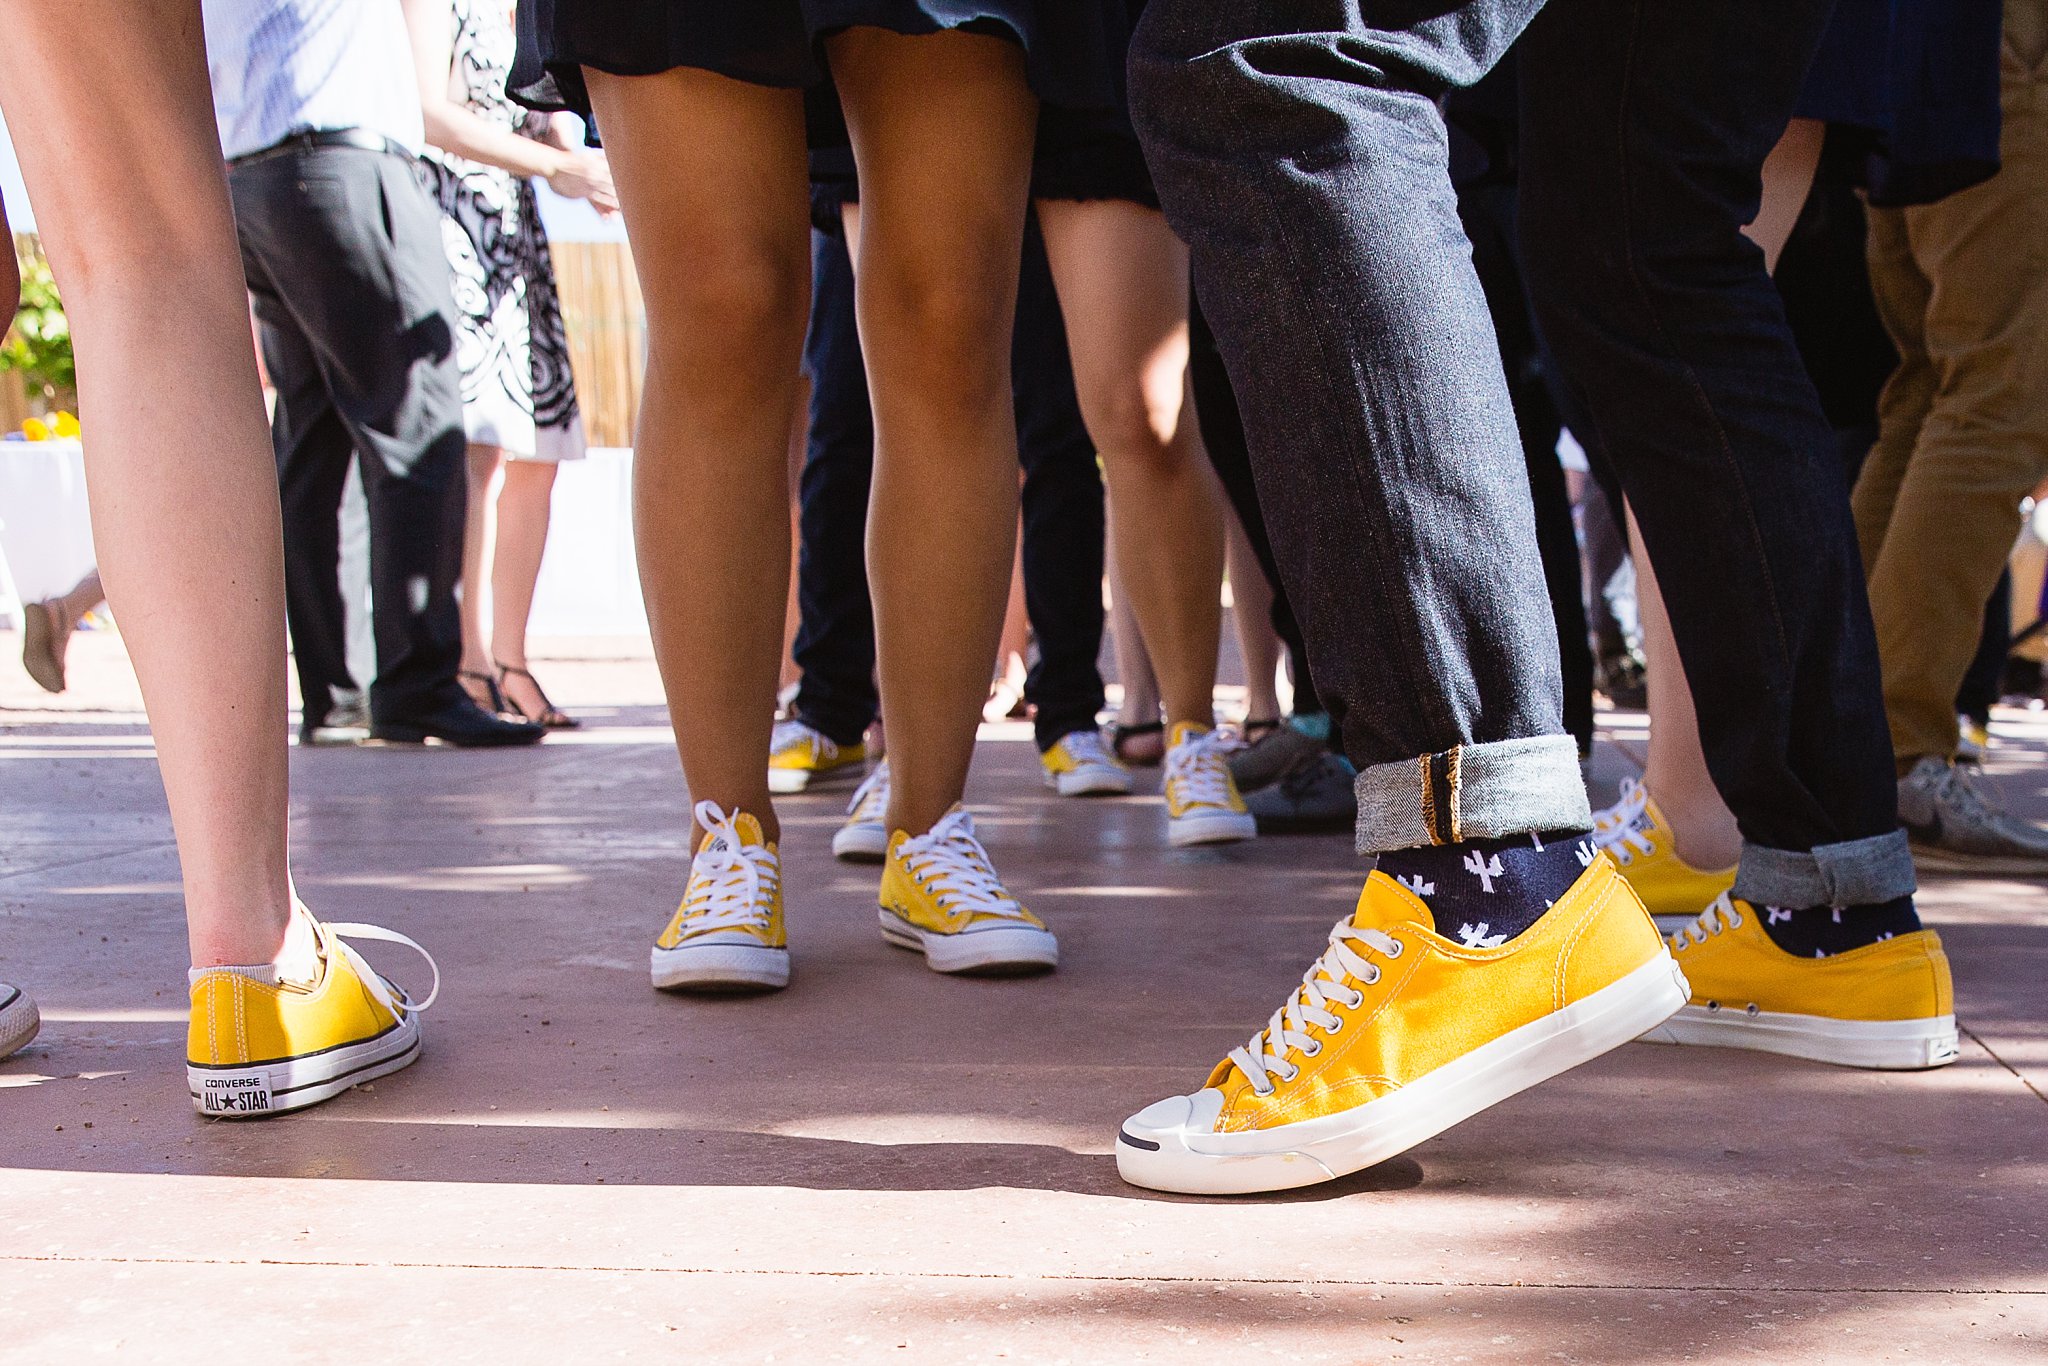 Bridal party's yellow converse while they are dancing at the wedding reception at a Sky Ranch Lodge wedding by PMA Photography.